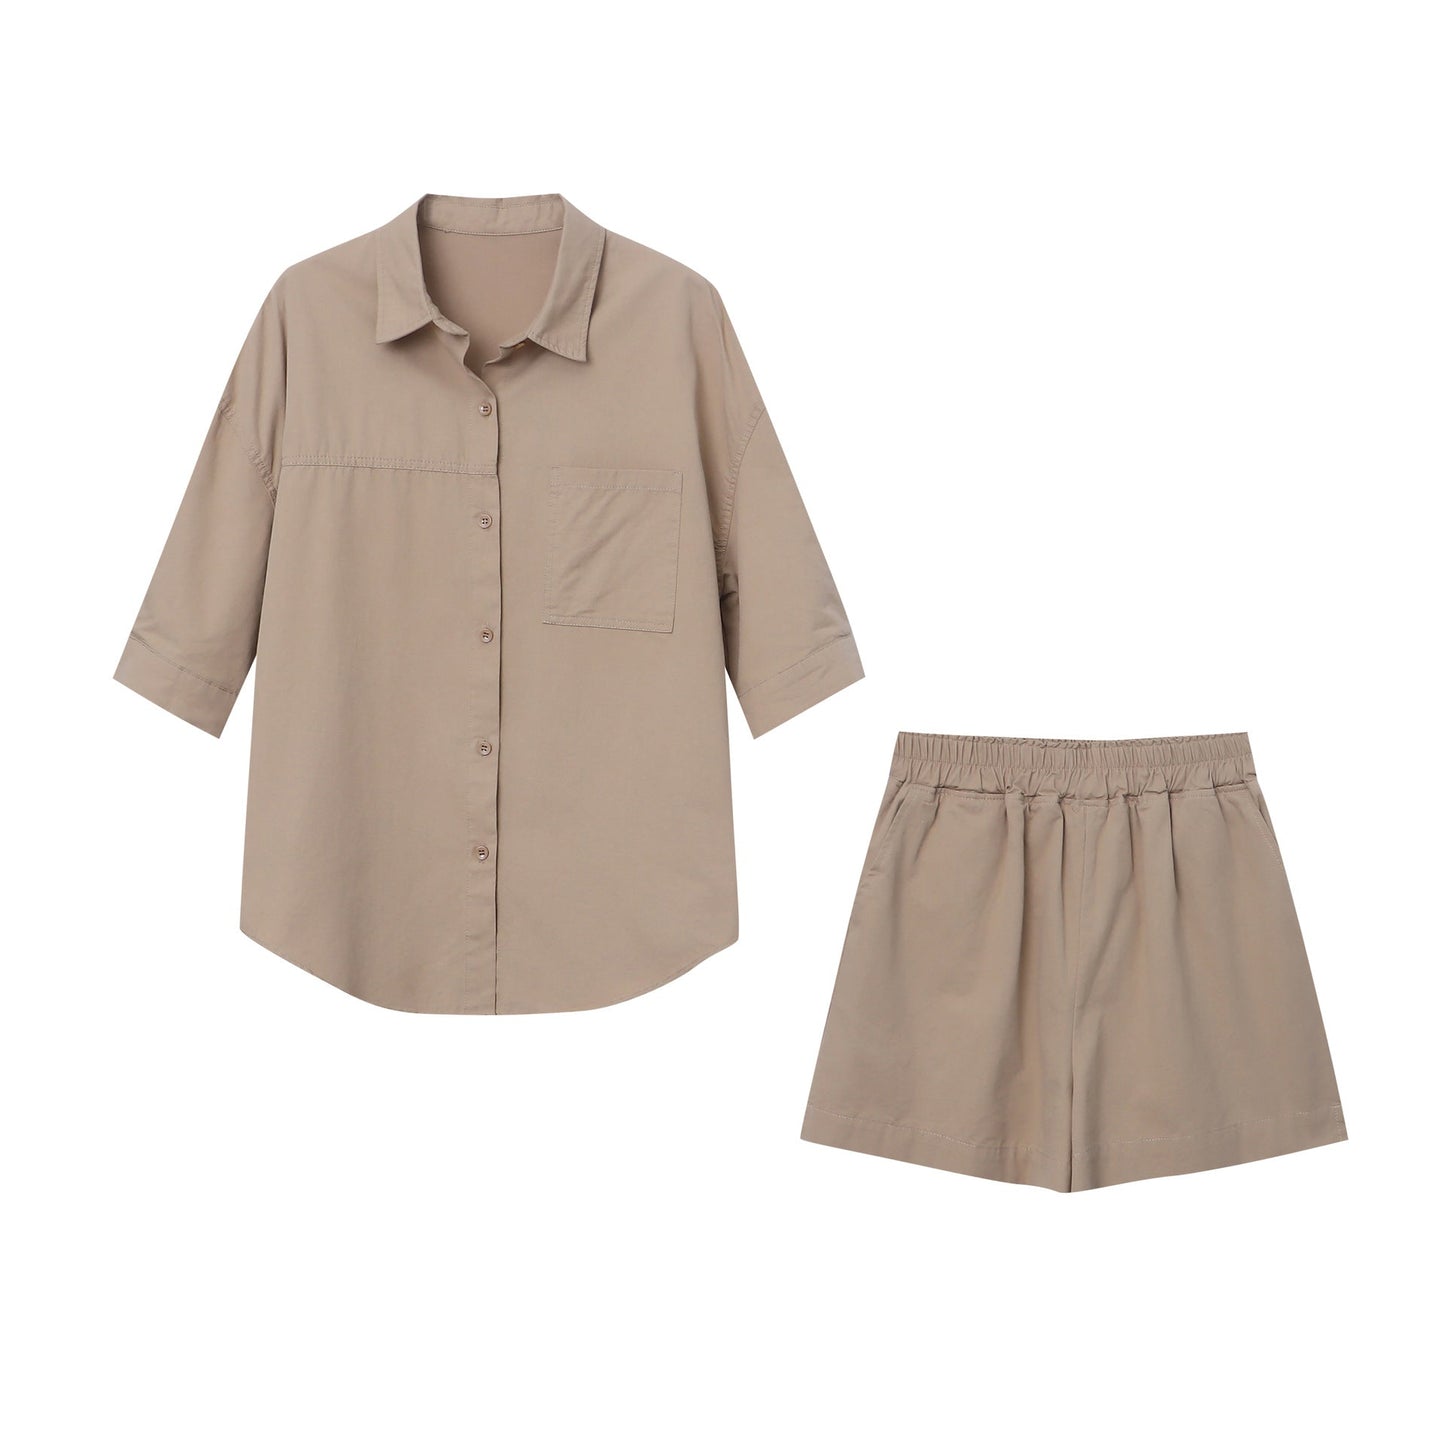 Clothing Series Cotton Washed Profile Loose Shirt Shorts Two Piece Suit